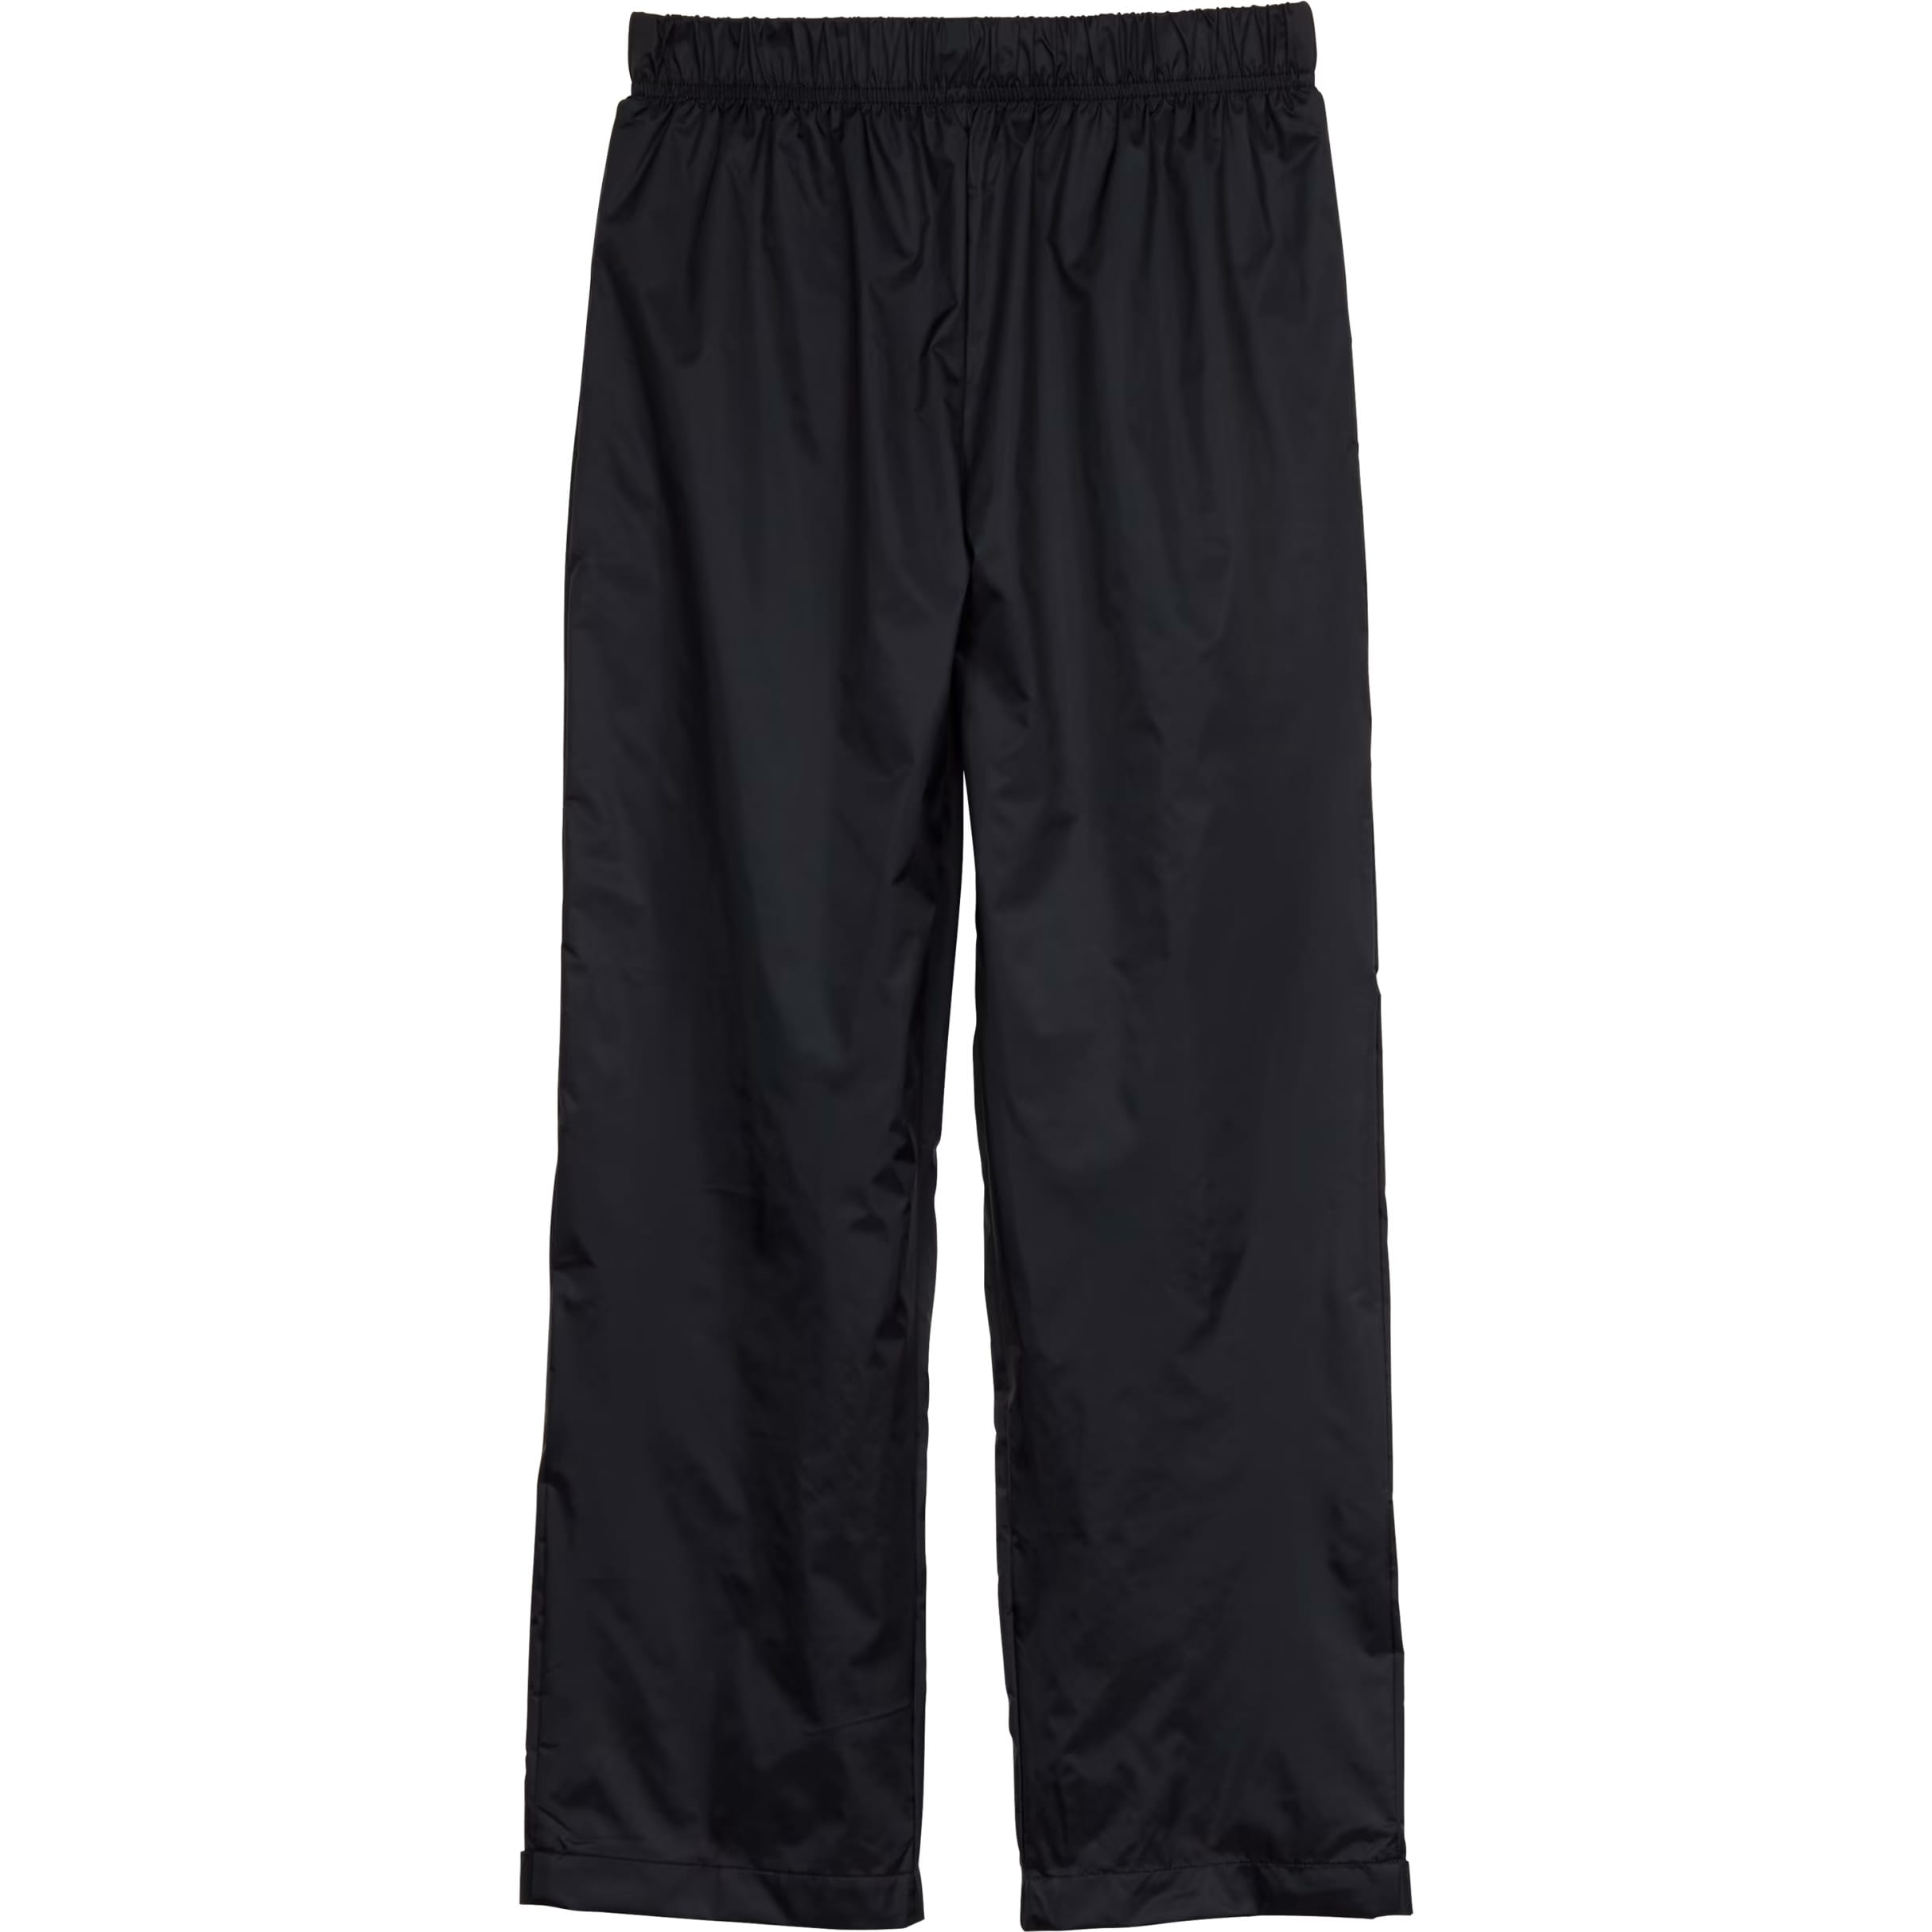 Outdoor Kids® Toddlers’ Rainswept Pants